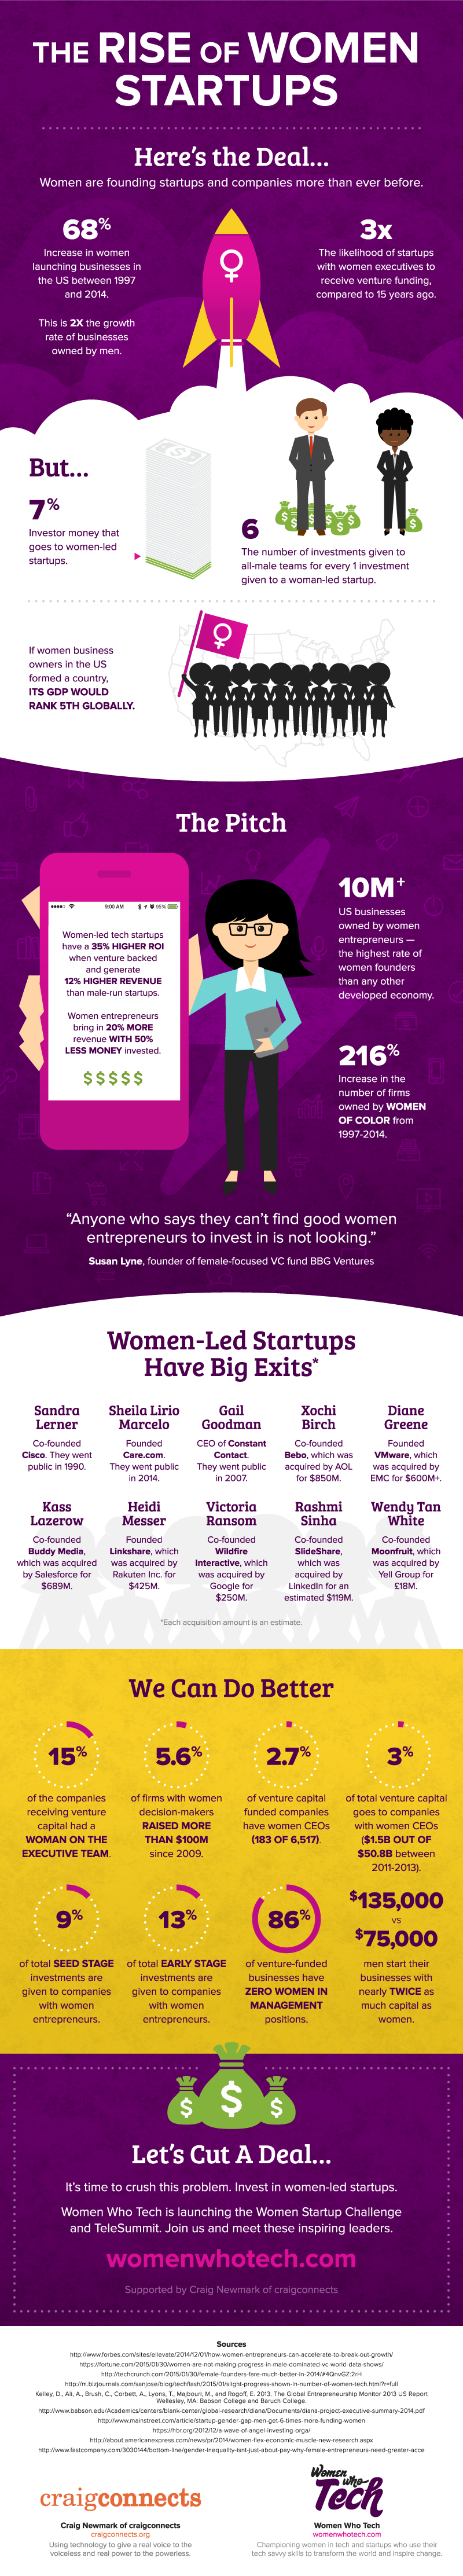 The Rise of Women Startups